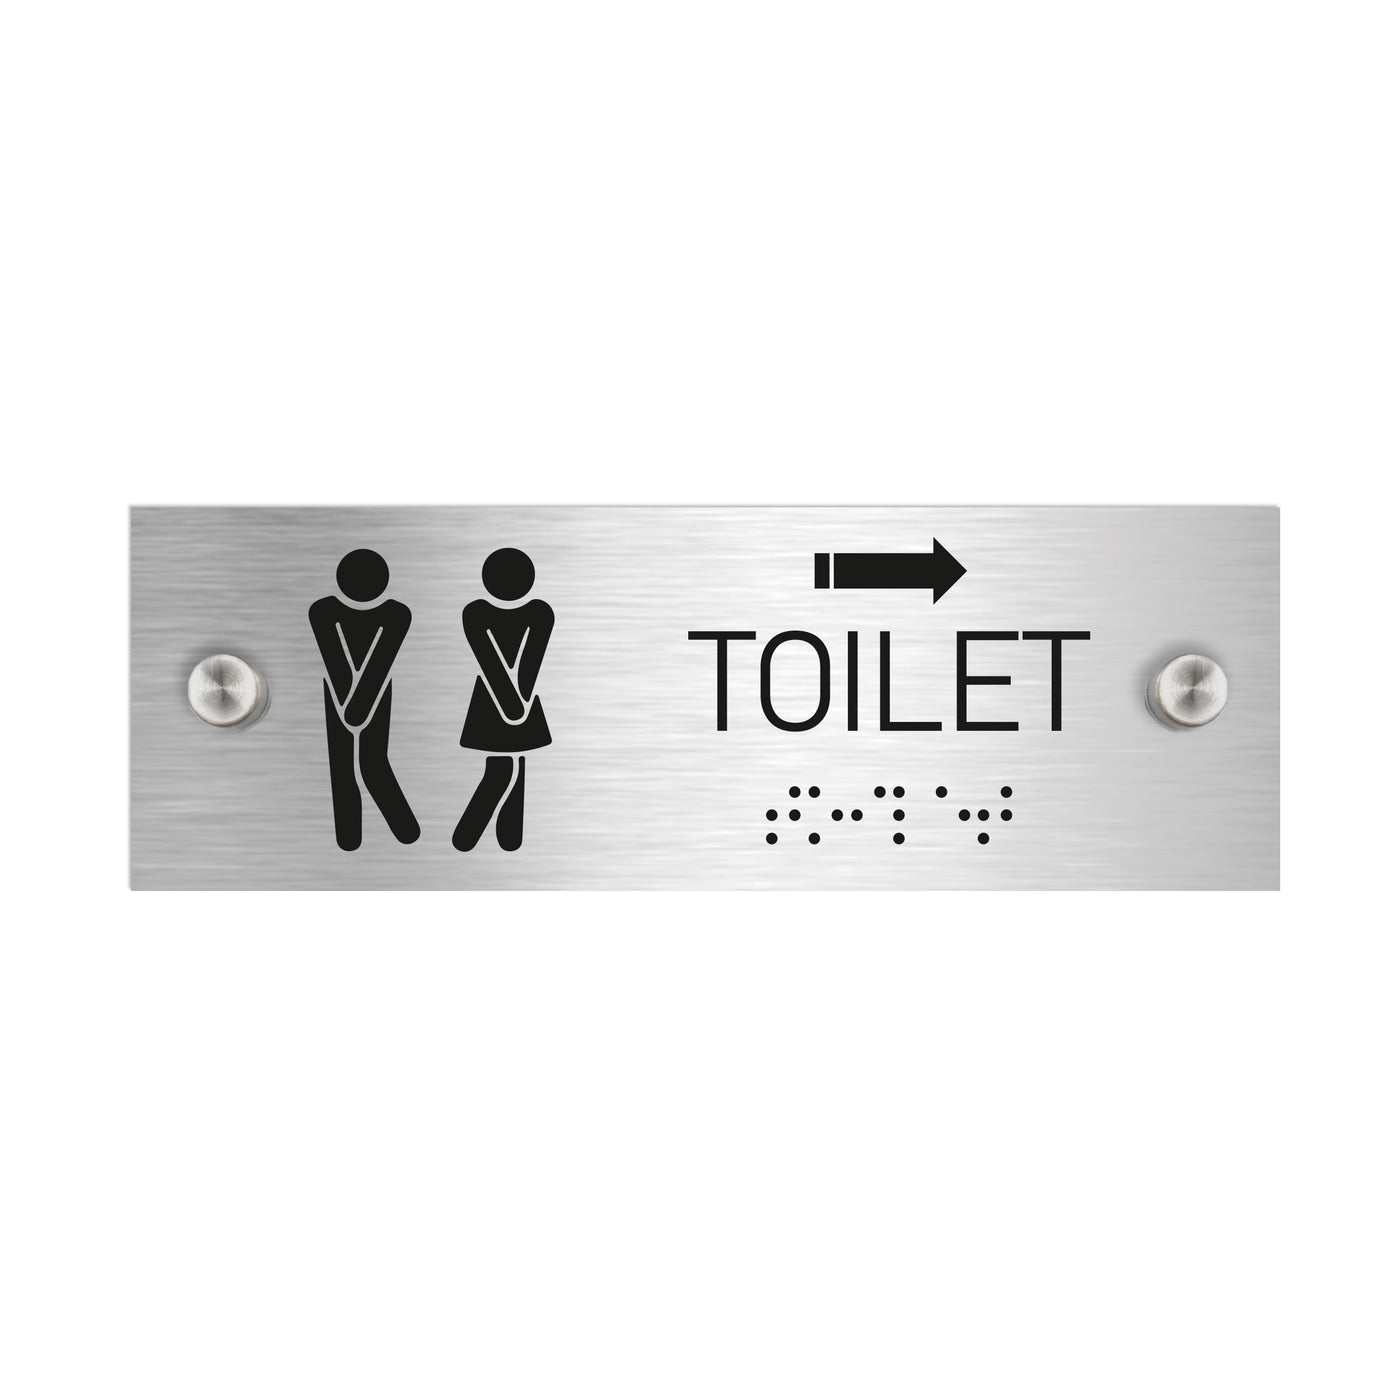 Bathroom Signs - Unisex Toilet Signs With Braille - Stainless Steel